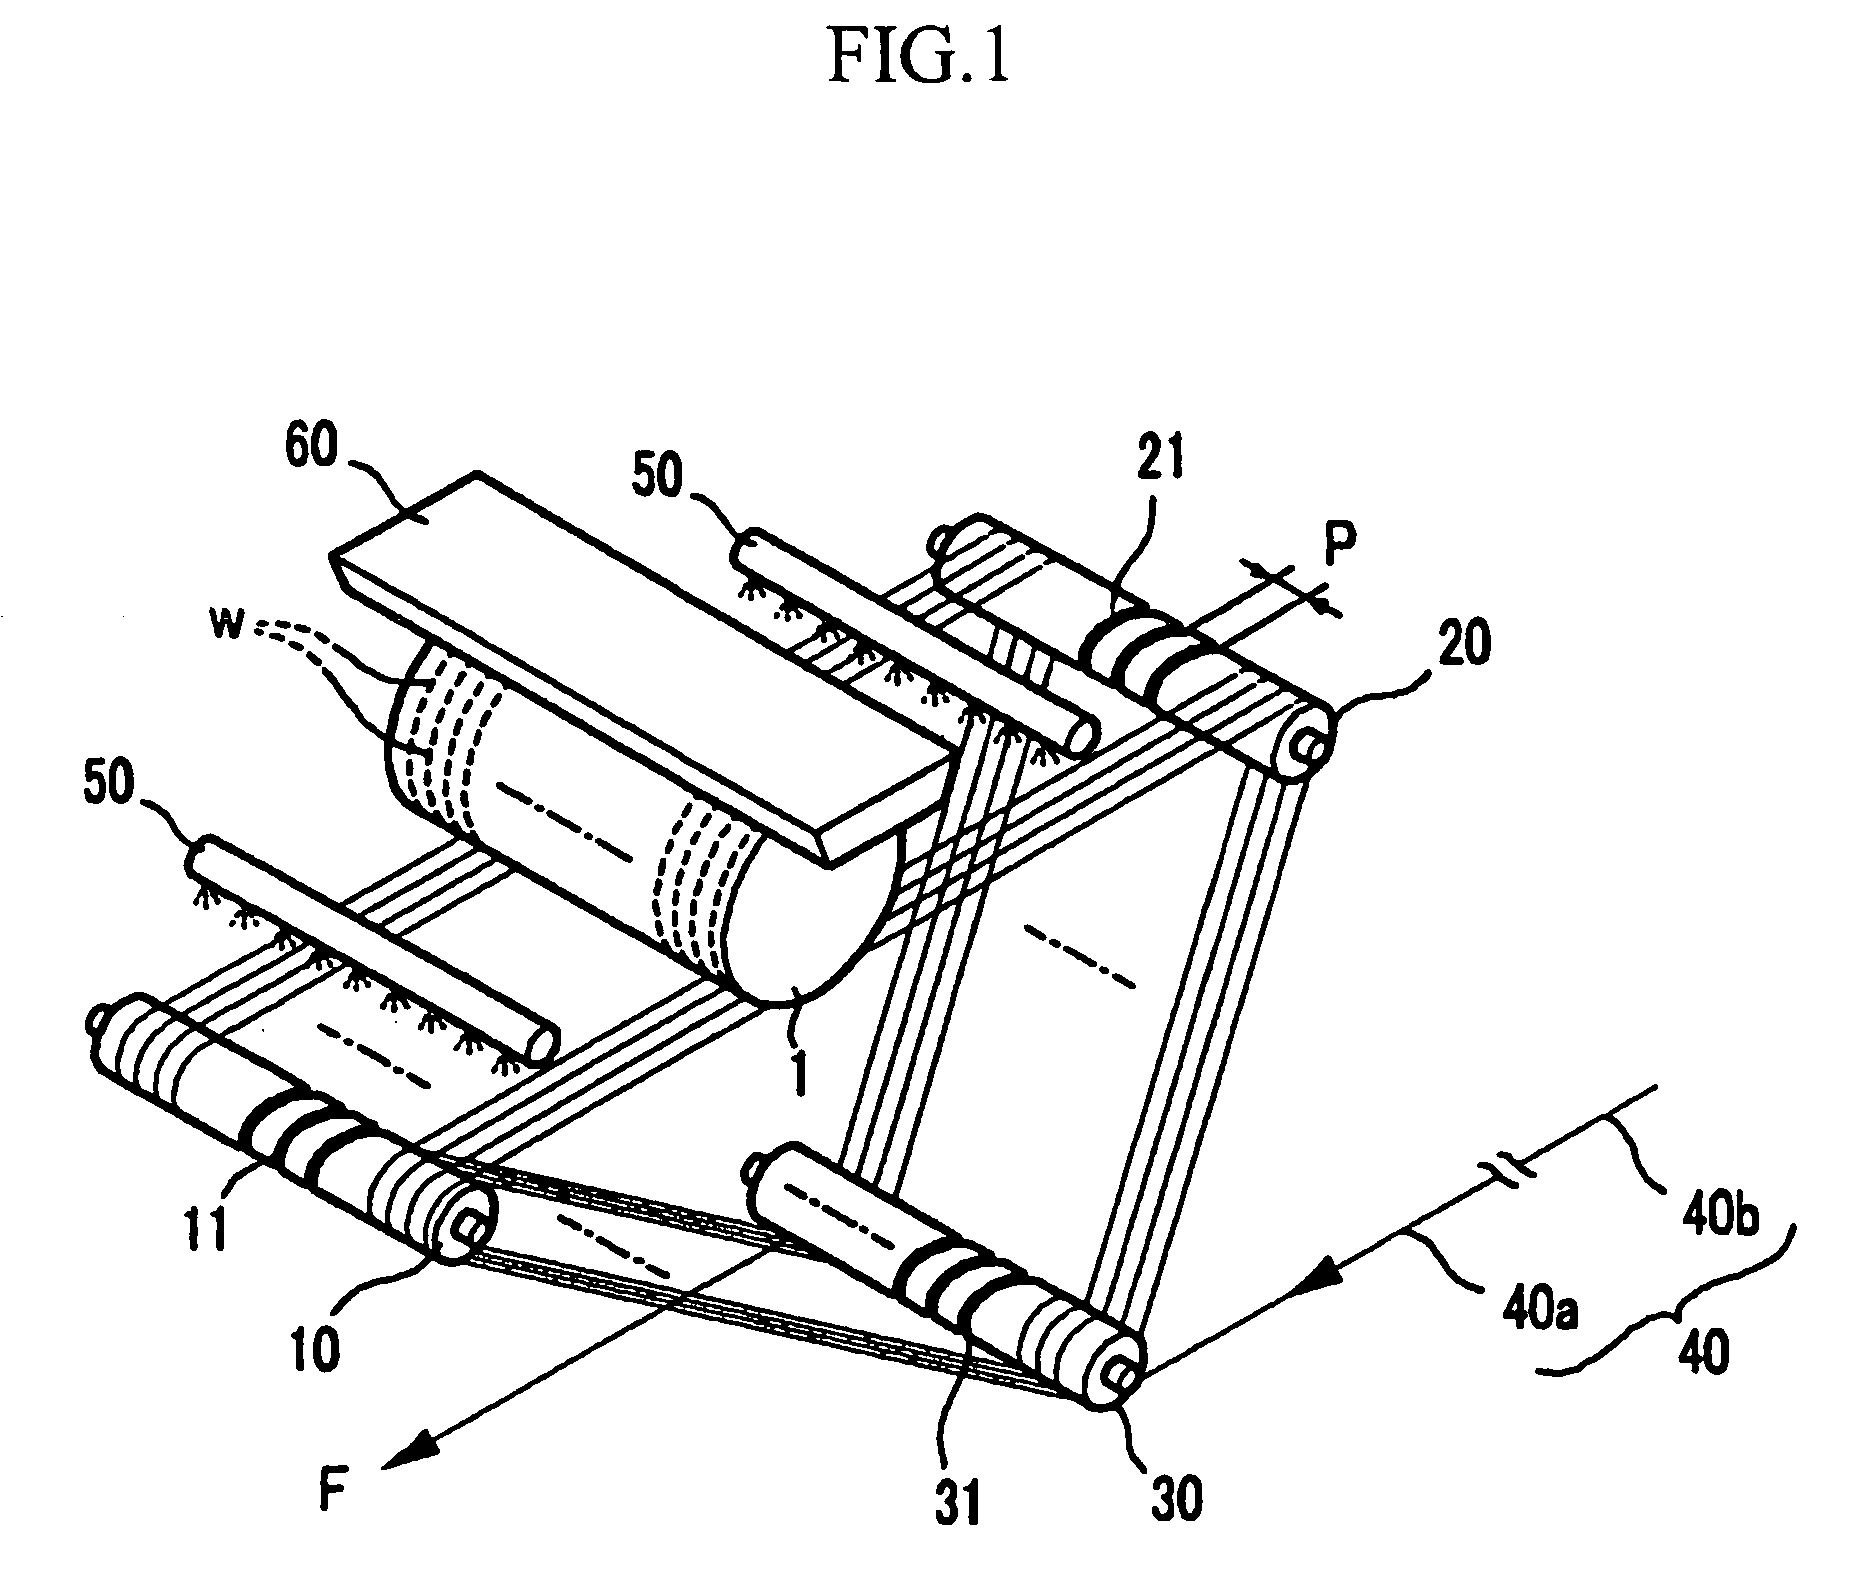 Apparatus and method for slicing an ingot